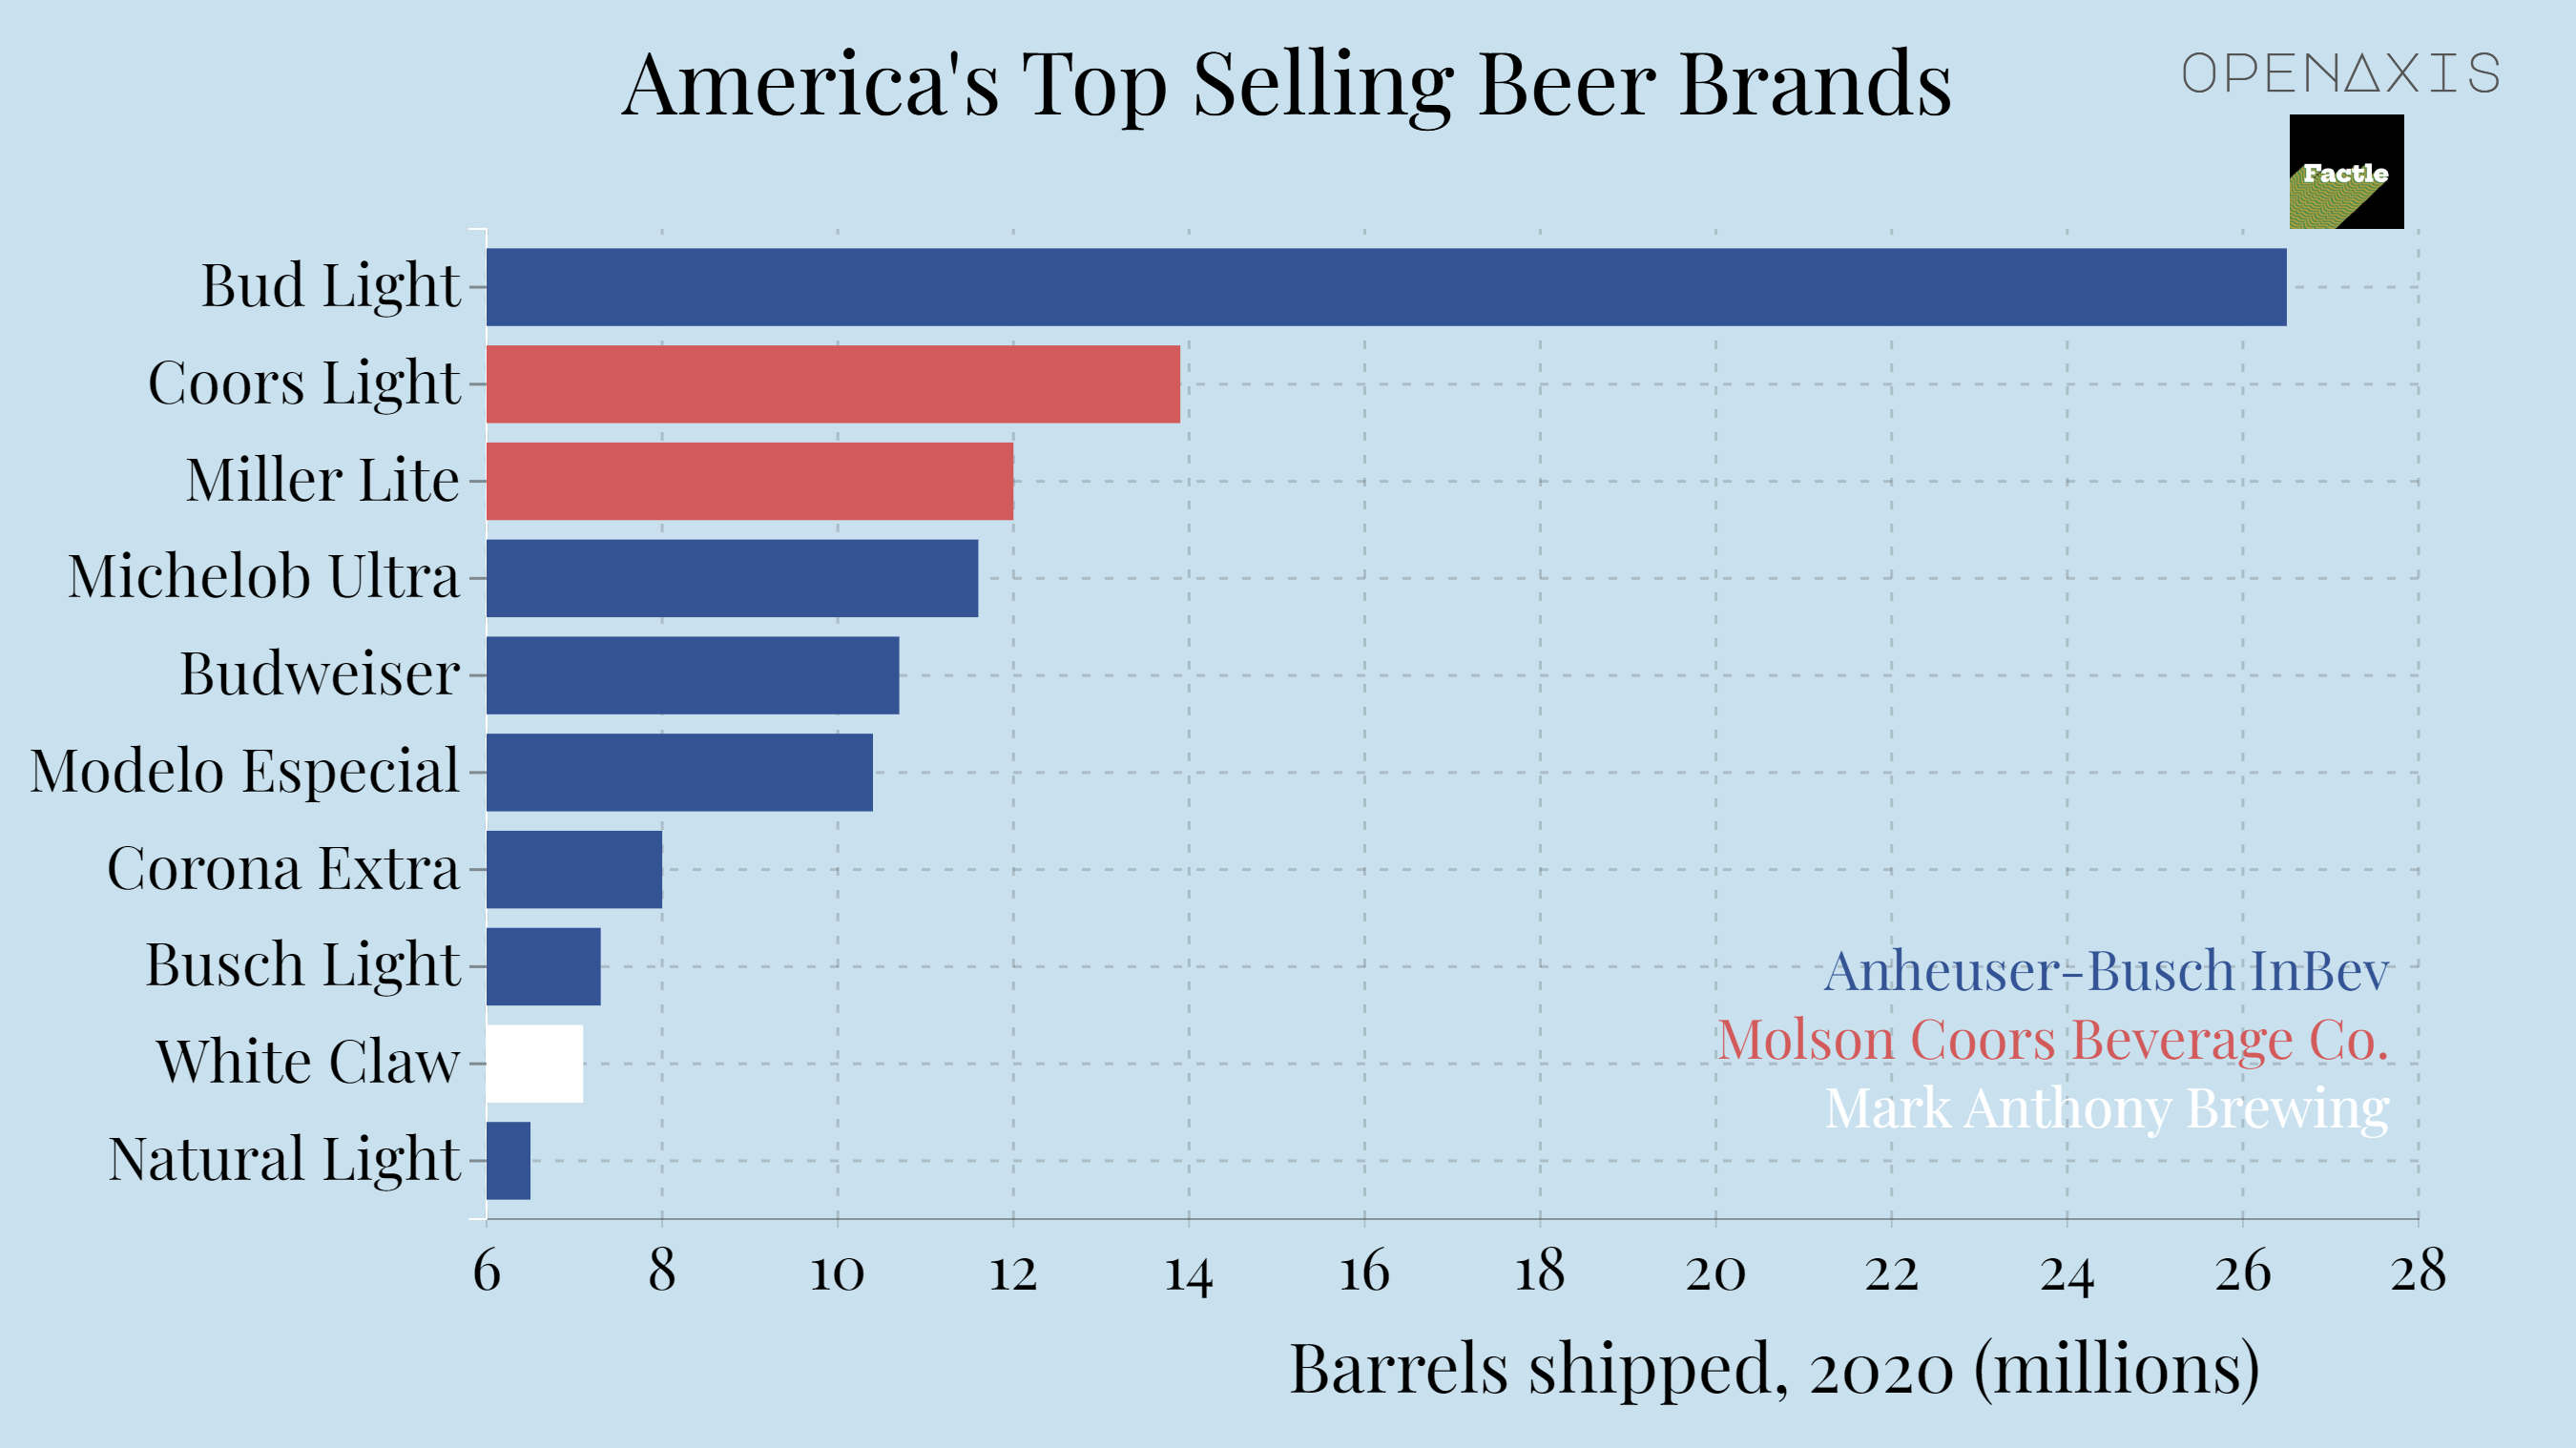 America's Top Selling Beer Brands 2020 (barrels shipped) Dataset on